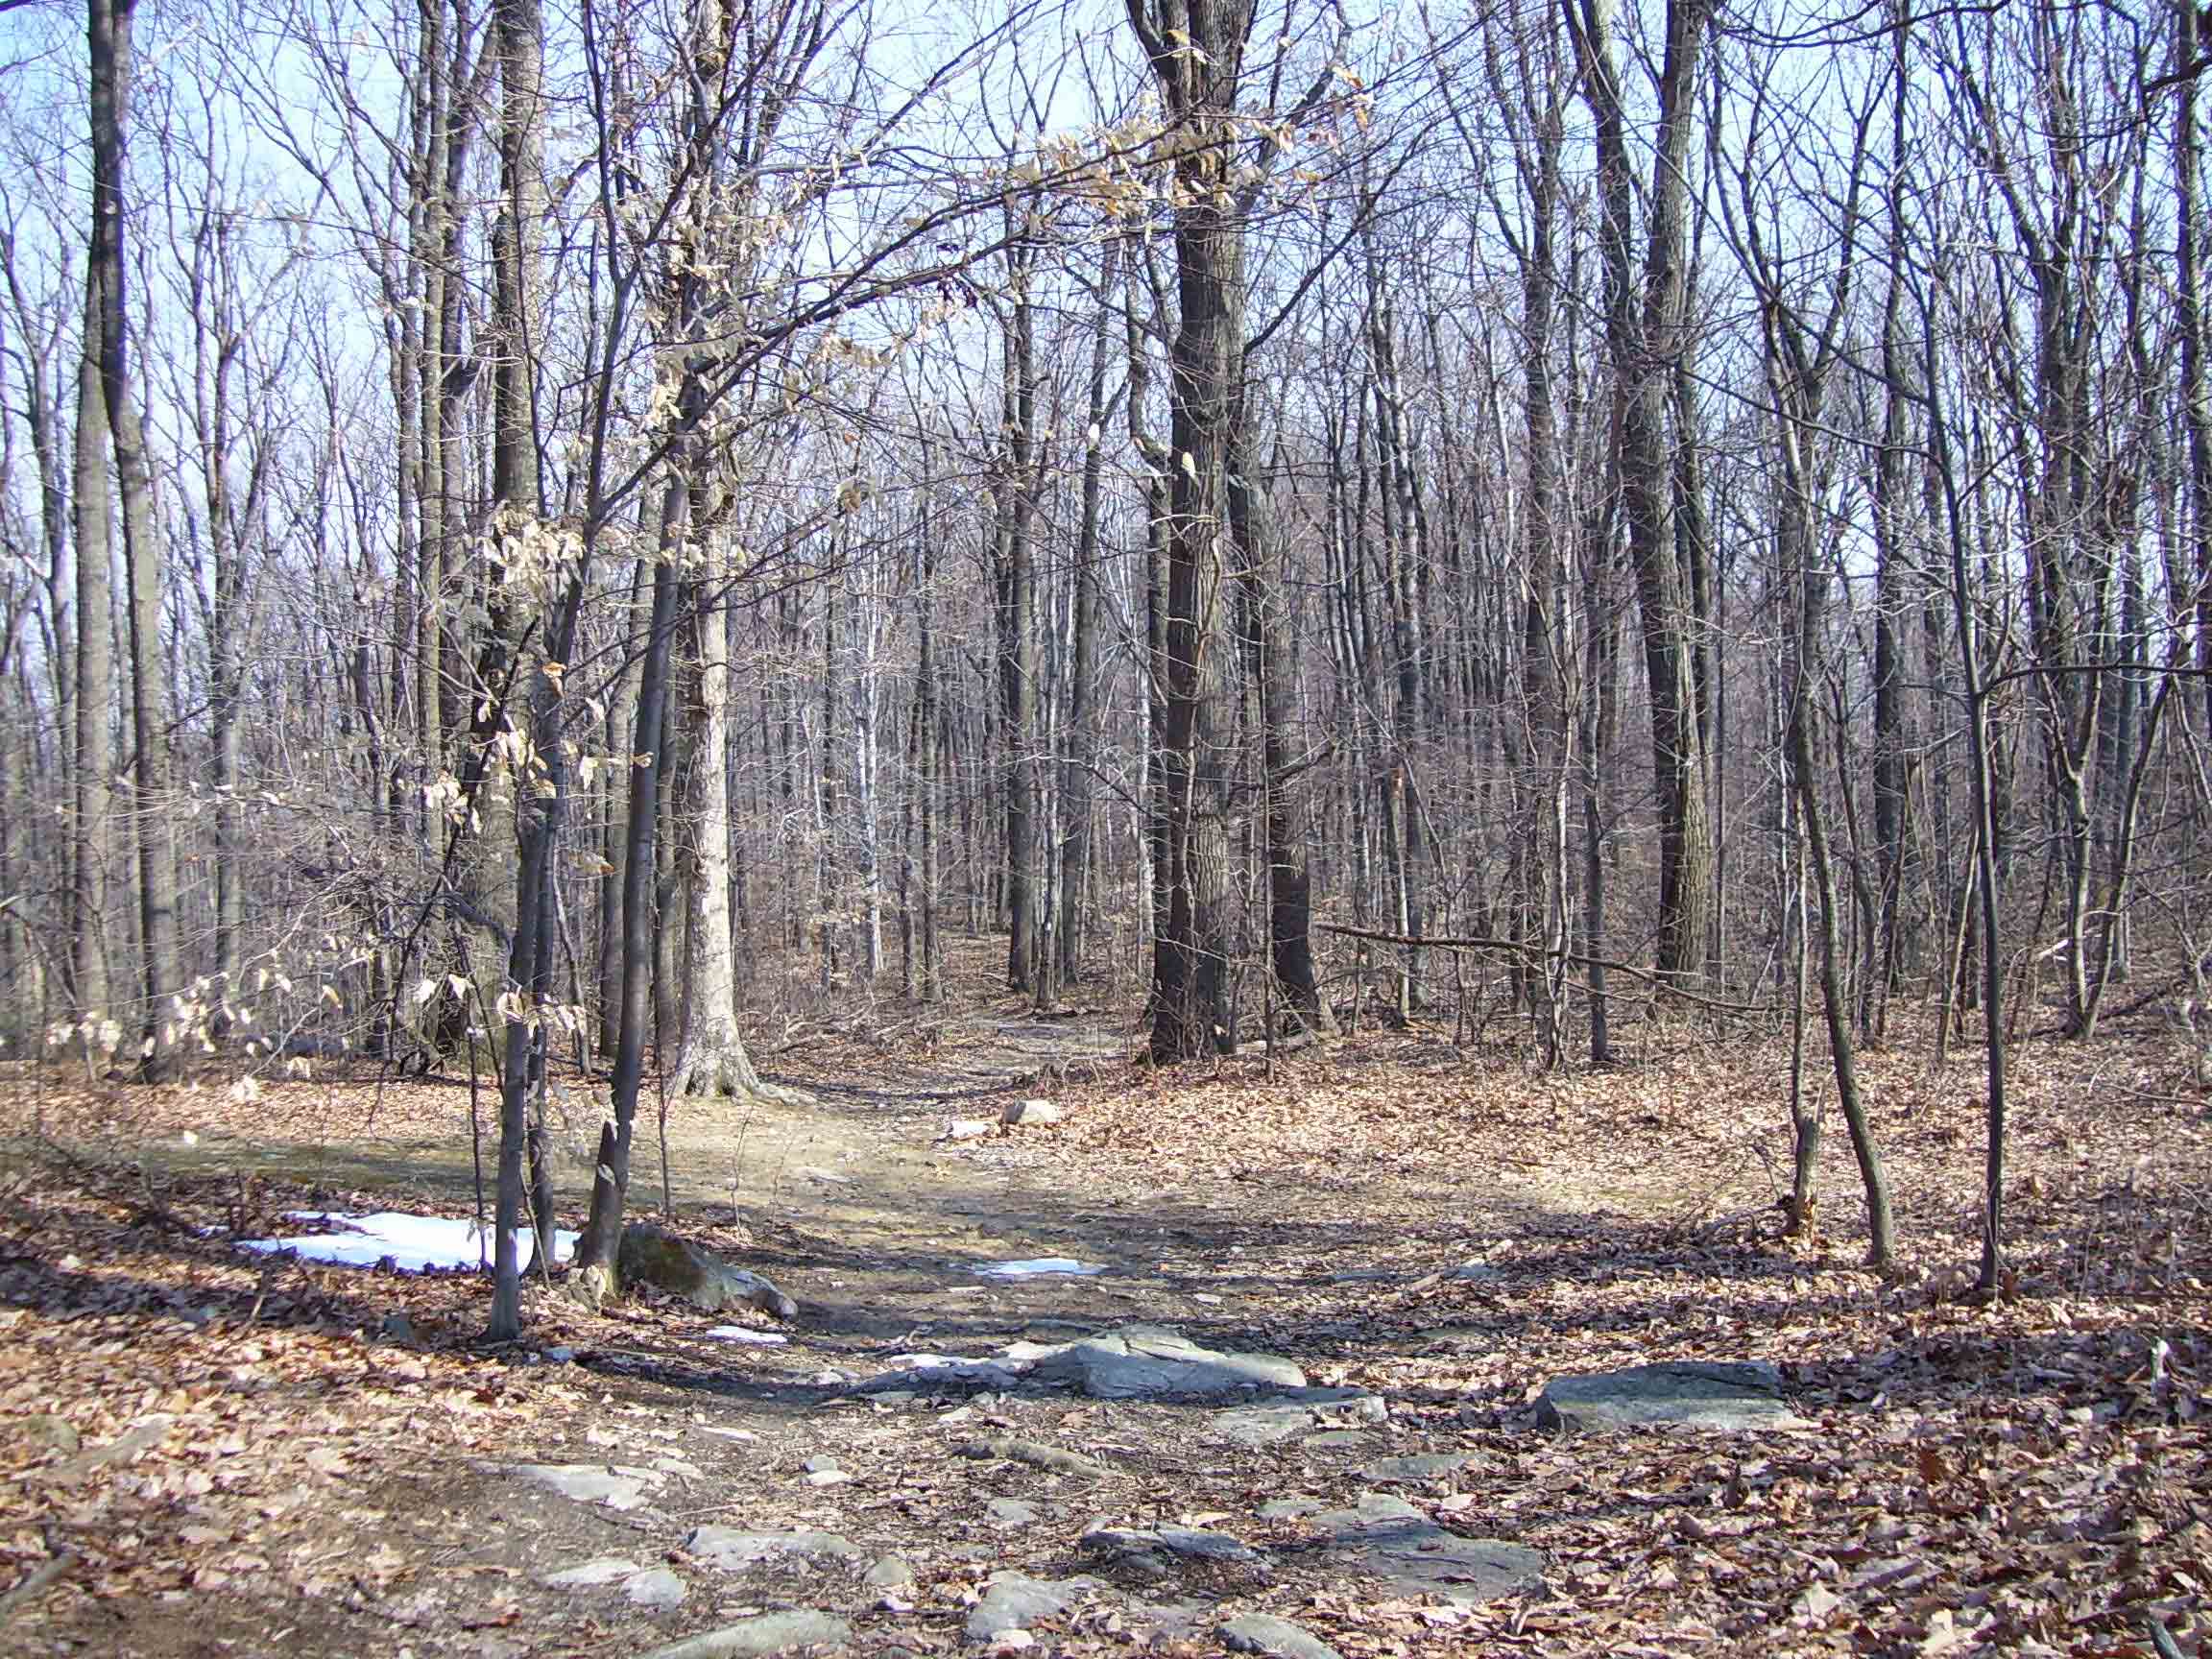 mm 1.7 - Brownsville Gap (March 2007). For quite some distance south of Crampton Gap, the trail follows an old road.  Courtesy dlcul@conncoll.edu